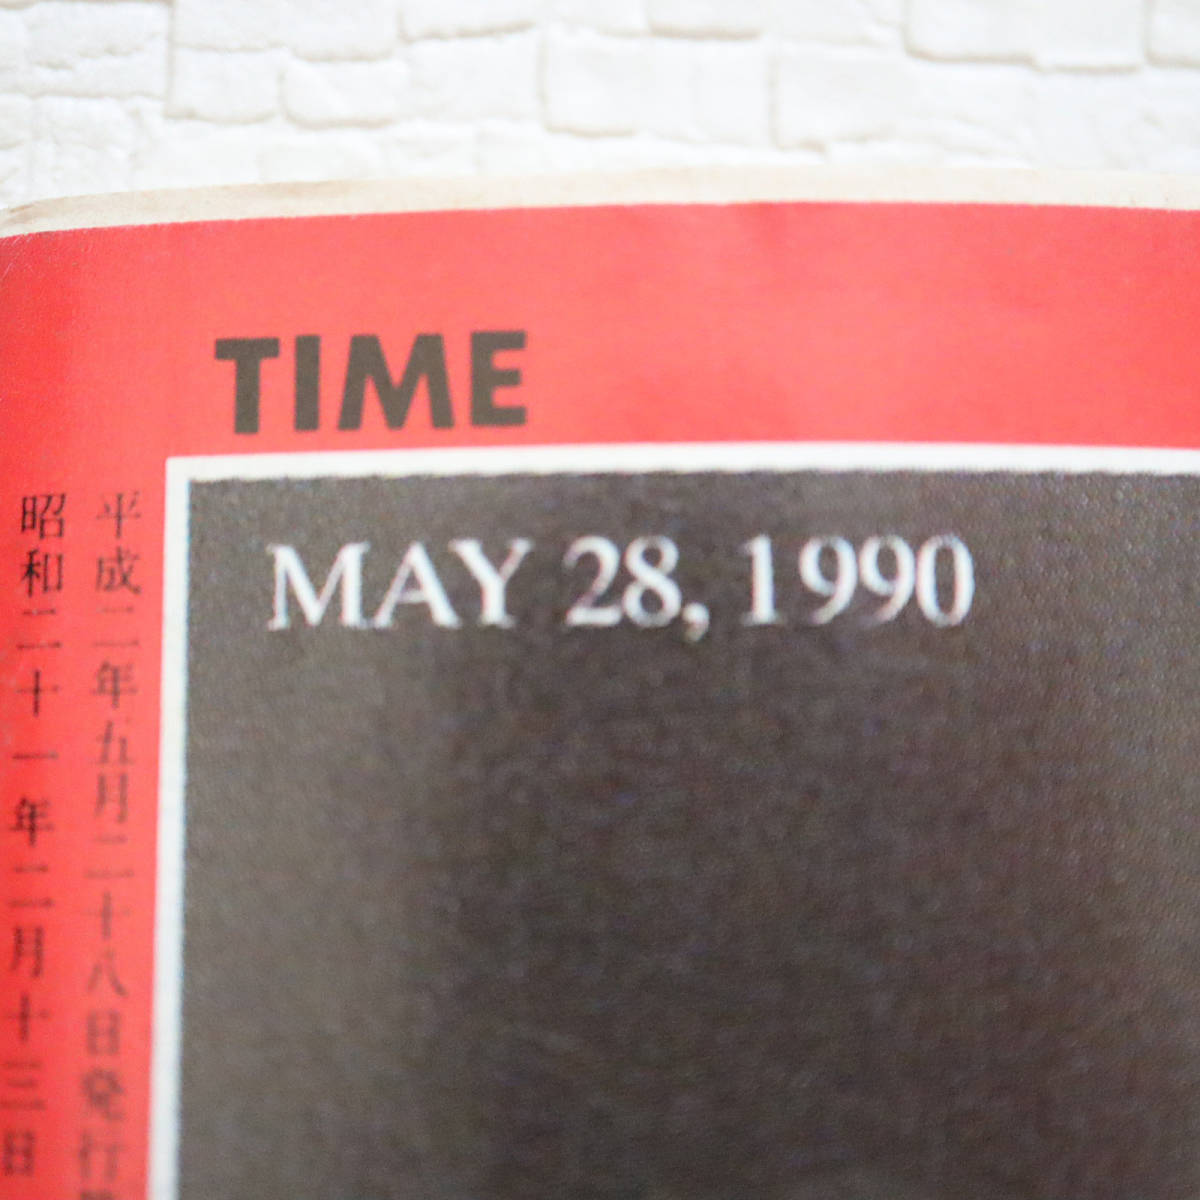 2332　TIME タイム　雑誌　タイムジャパン　1990年5月28日発行　May 28,1990　週刊誌　古雑誌　古書　古本　美品　誕生日プレゼント_画像4